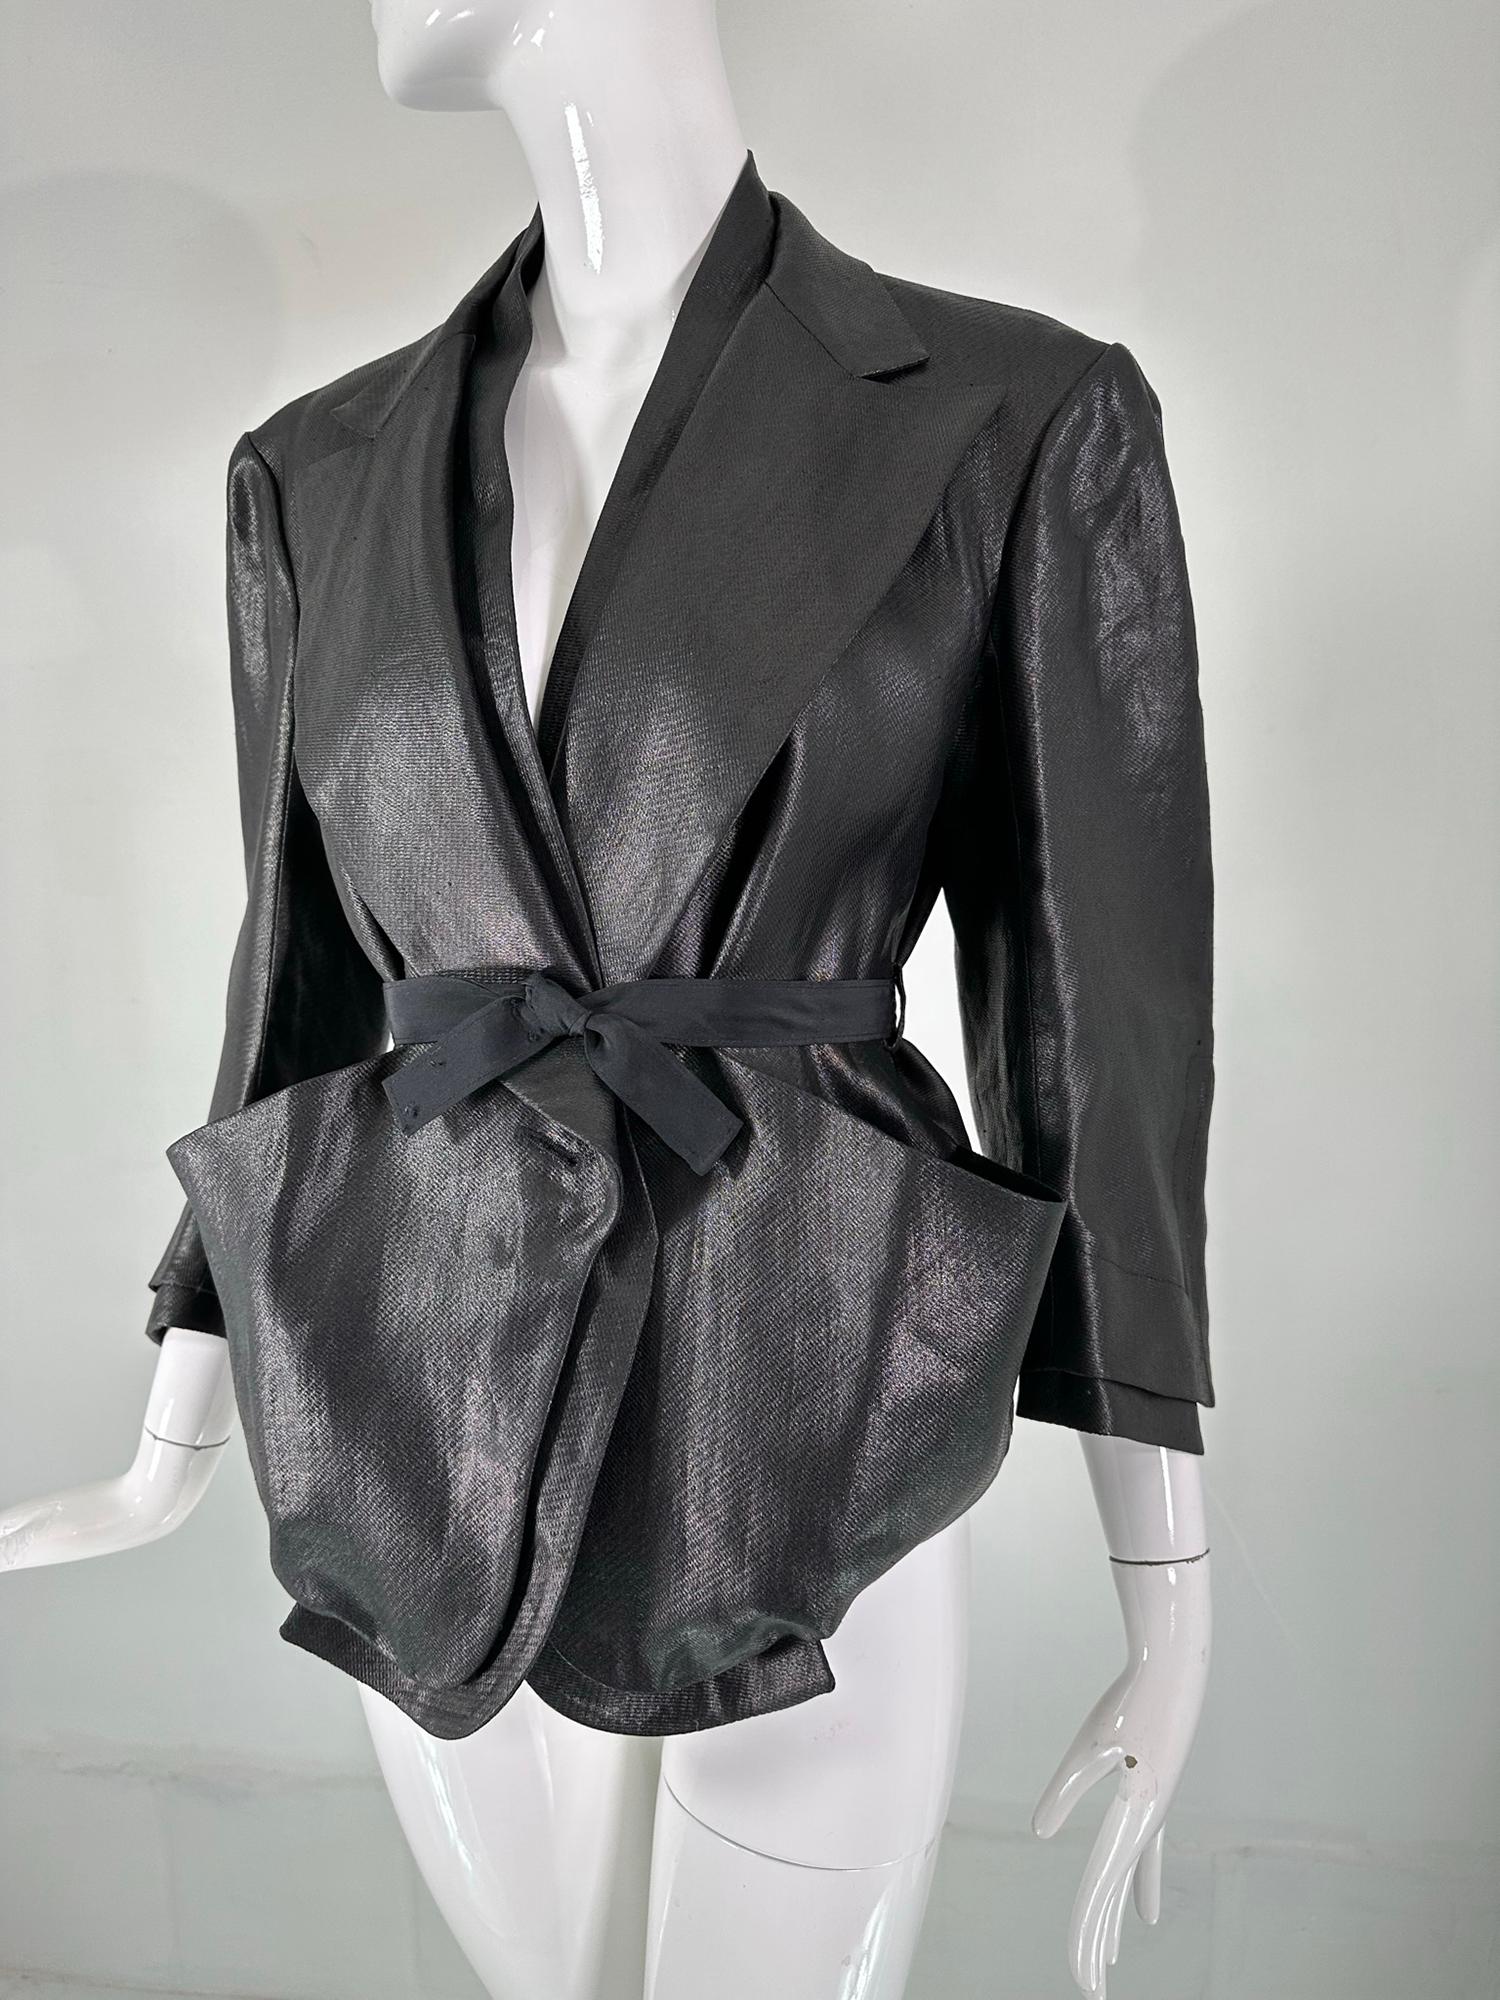 Sonia Rykiel black glazed linen, big pocket, button facings, belted cropped jacket. This is a special jacket with lots of style. The fabric has the look of leather, but upon close inspection you can see the beauty of the process of the fabric. The